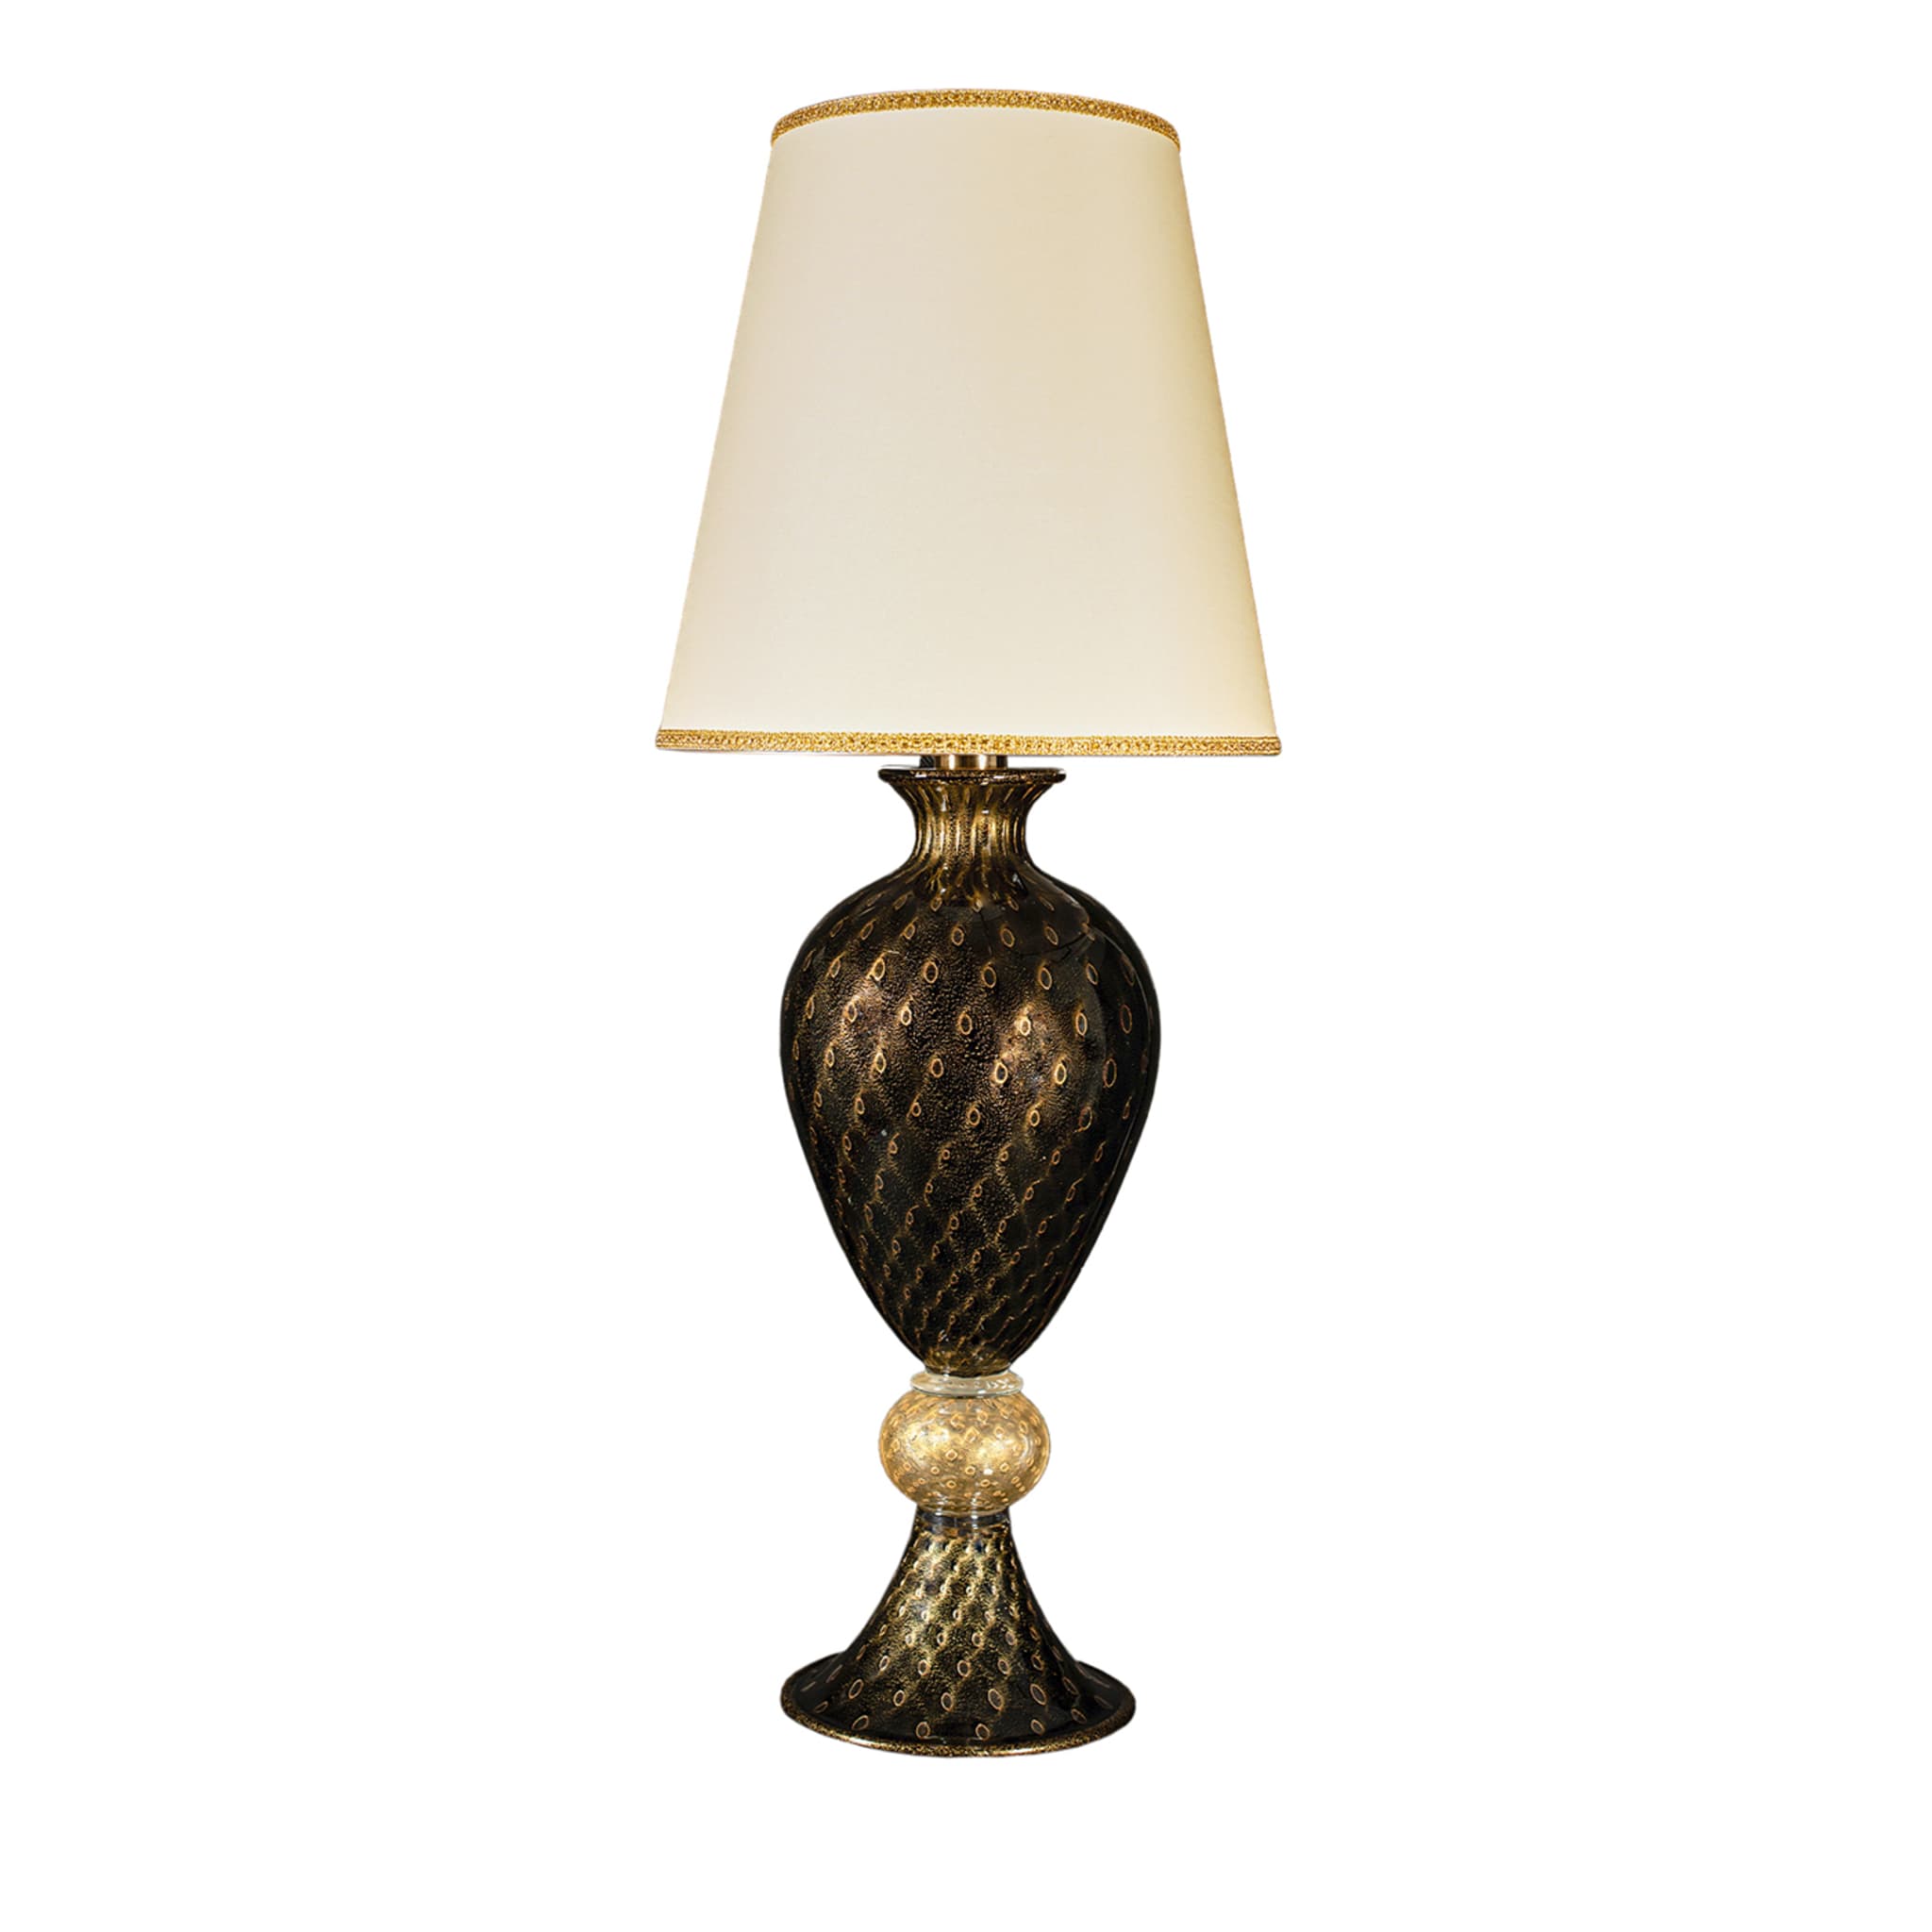 Tall Black and Golden Table Lamp #1 - Main view